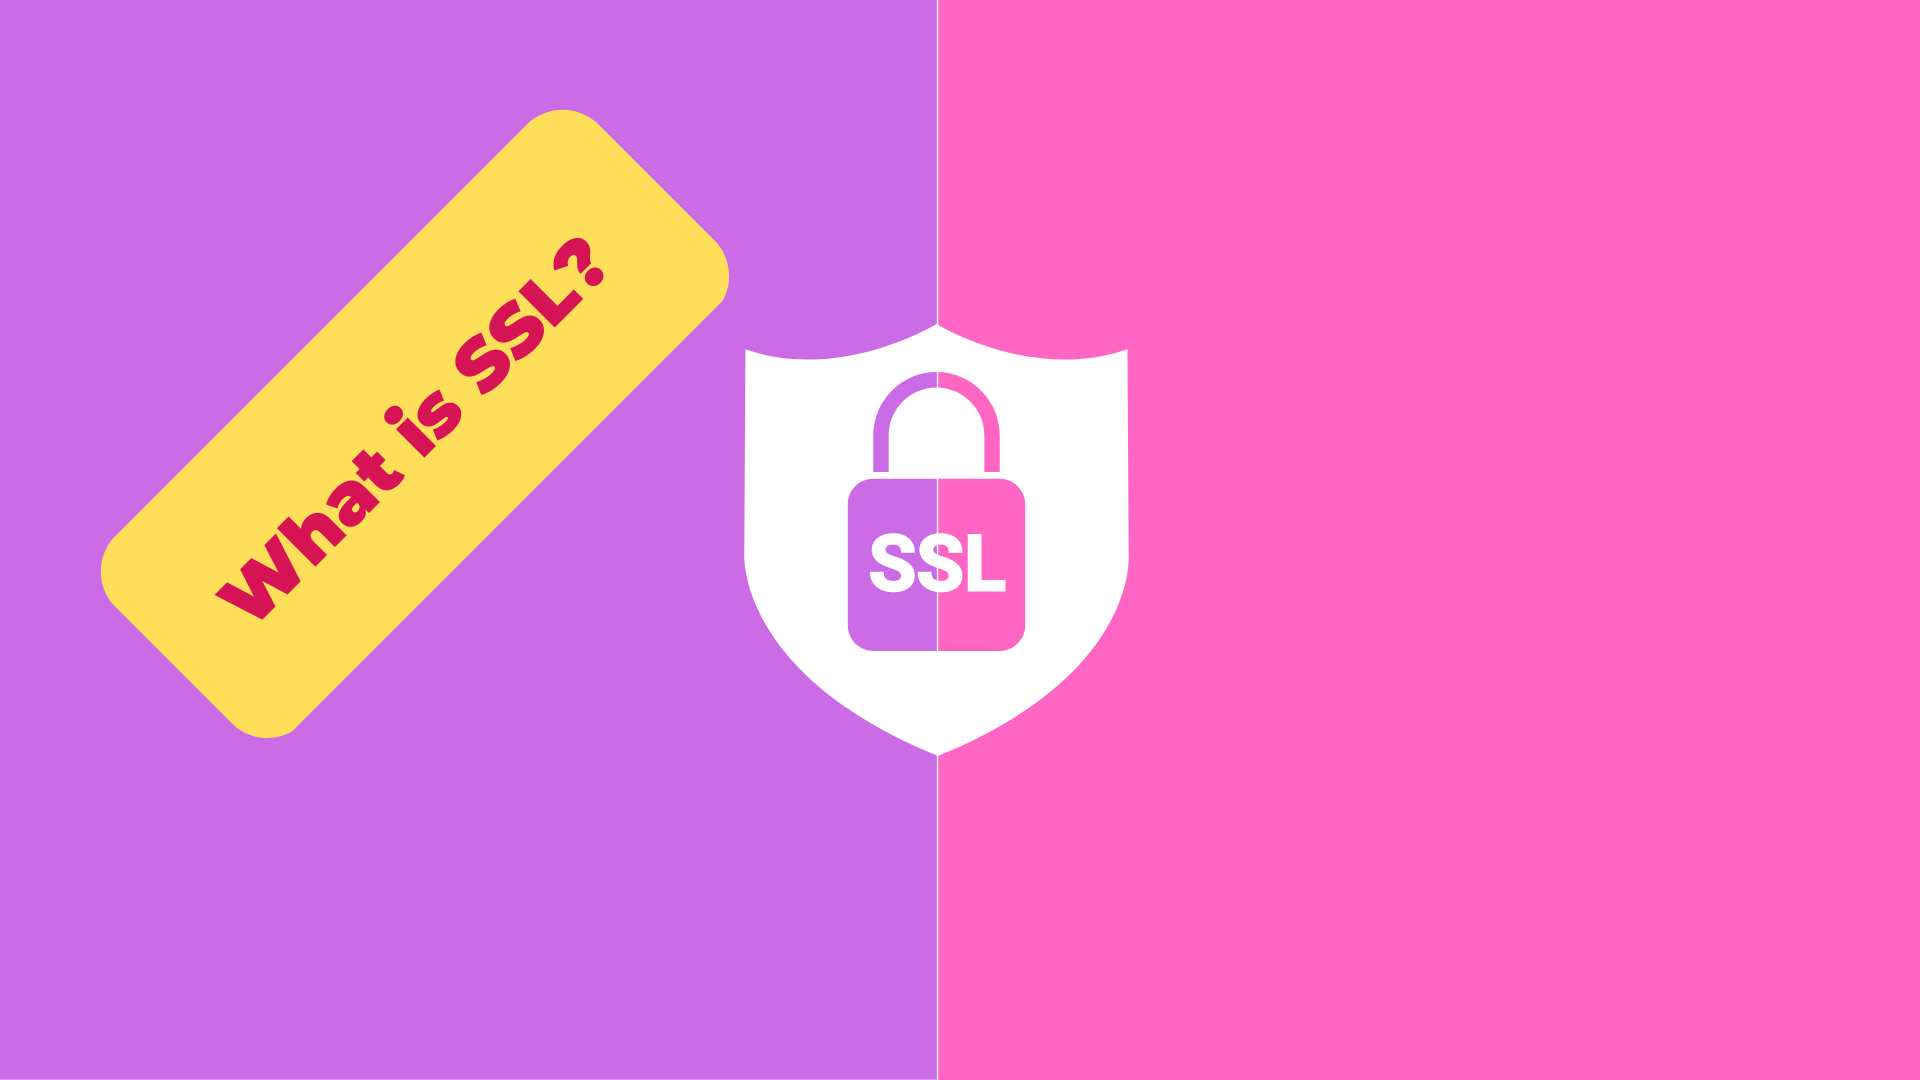 What is SSL?